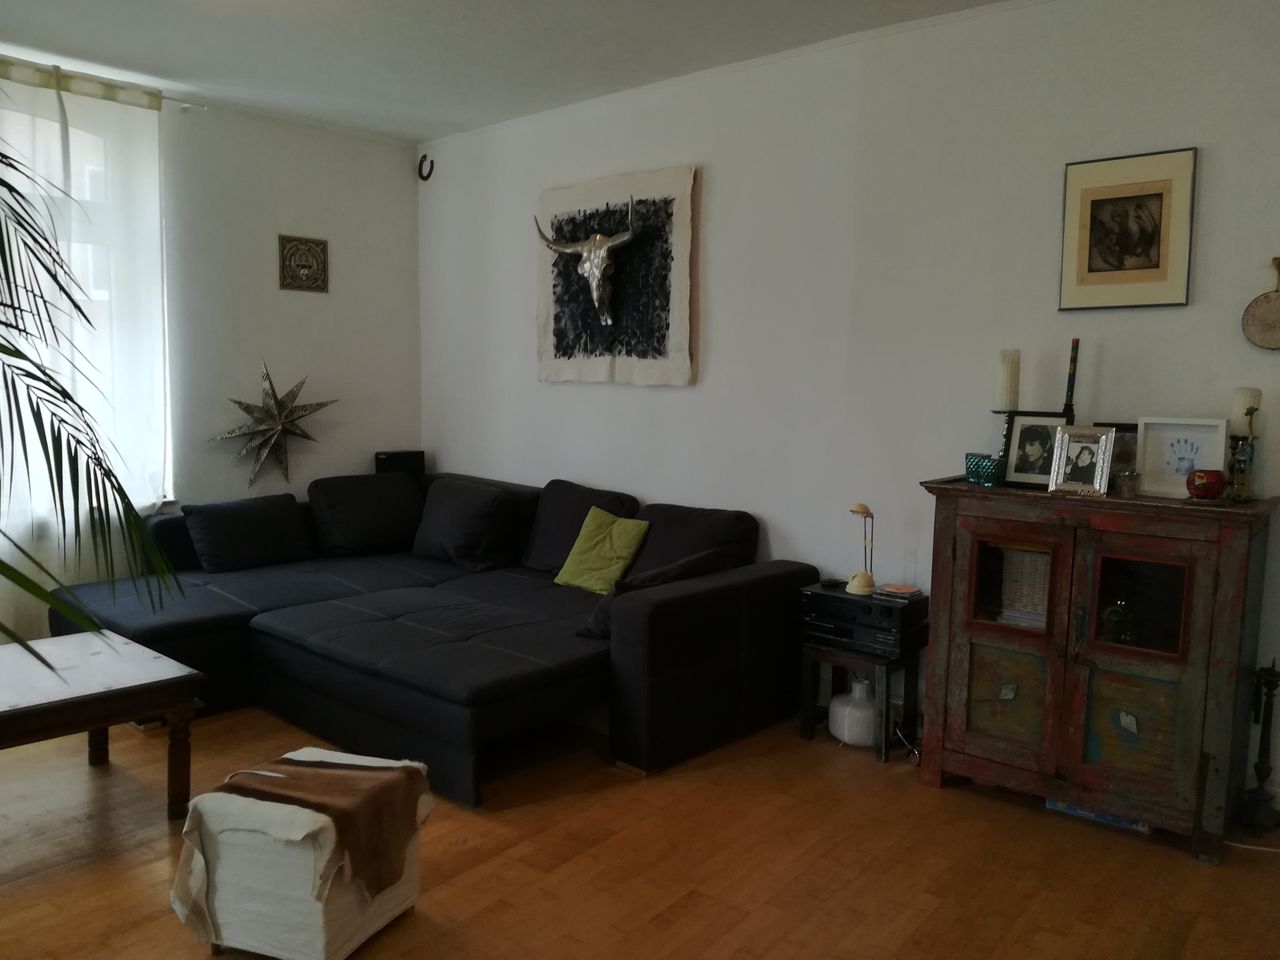 It couldn´t be better - beautiful flat in the heart of Cologne.